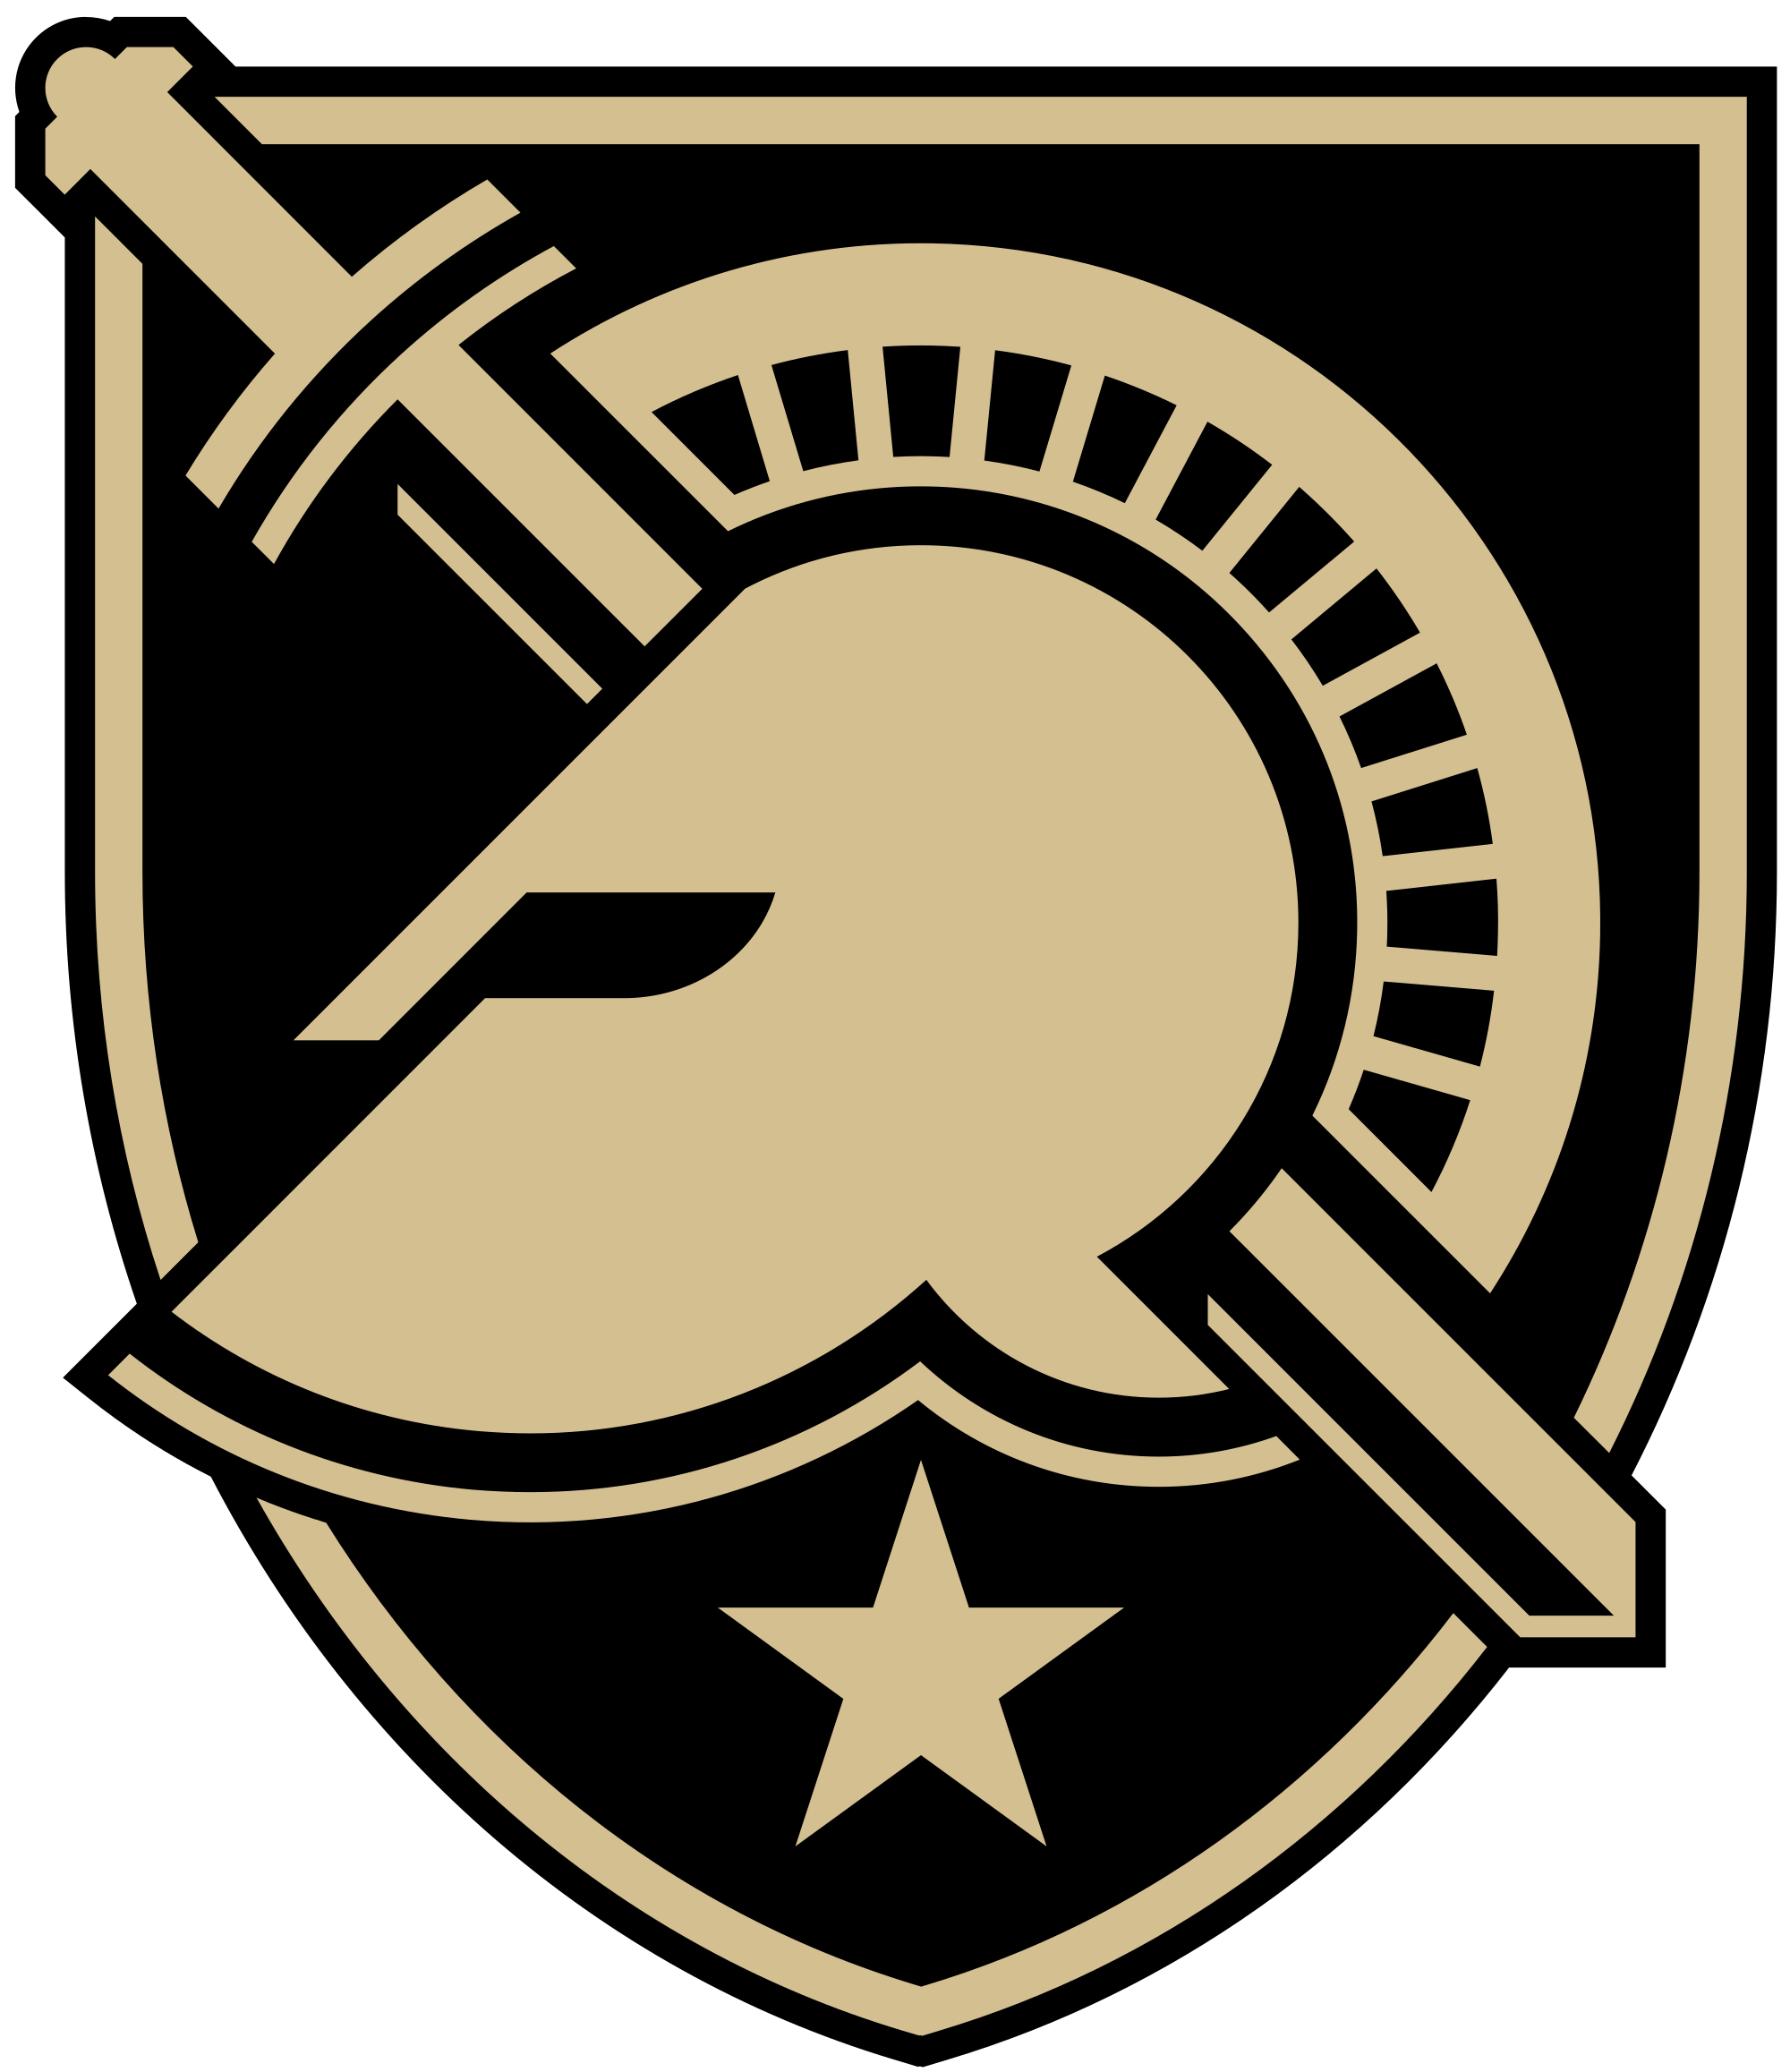 Air Force College Football Logo - Air Force Falcons vs. Army West Point Black Knights Prediction and ...